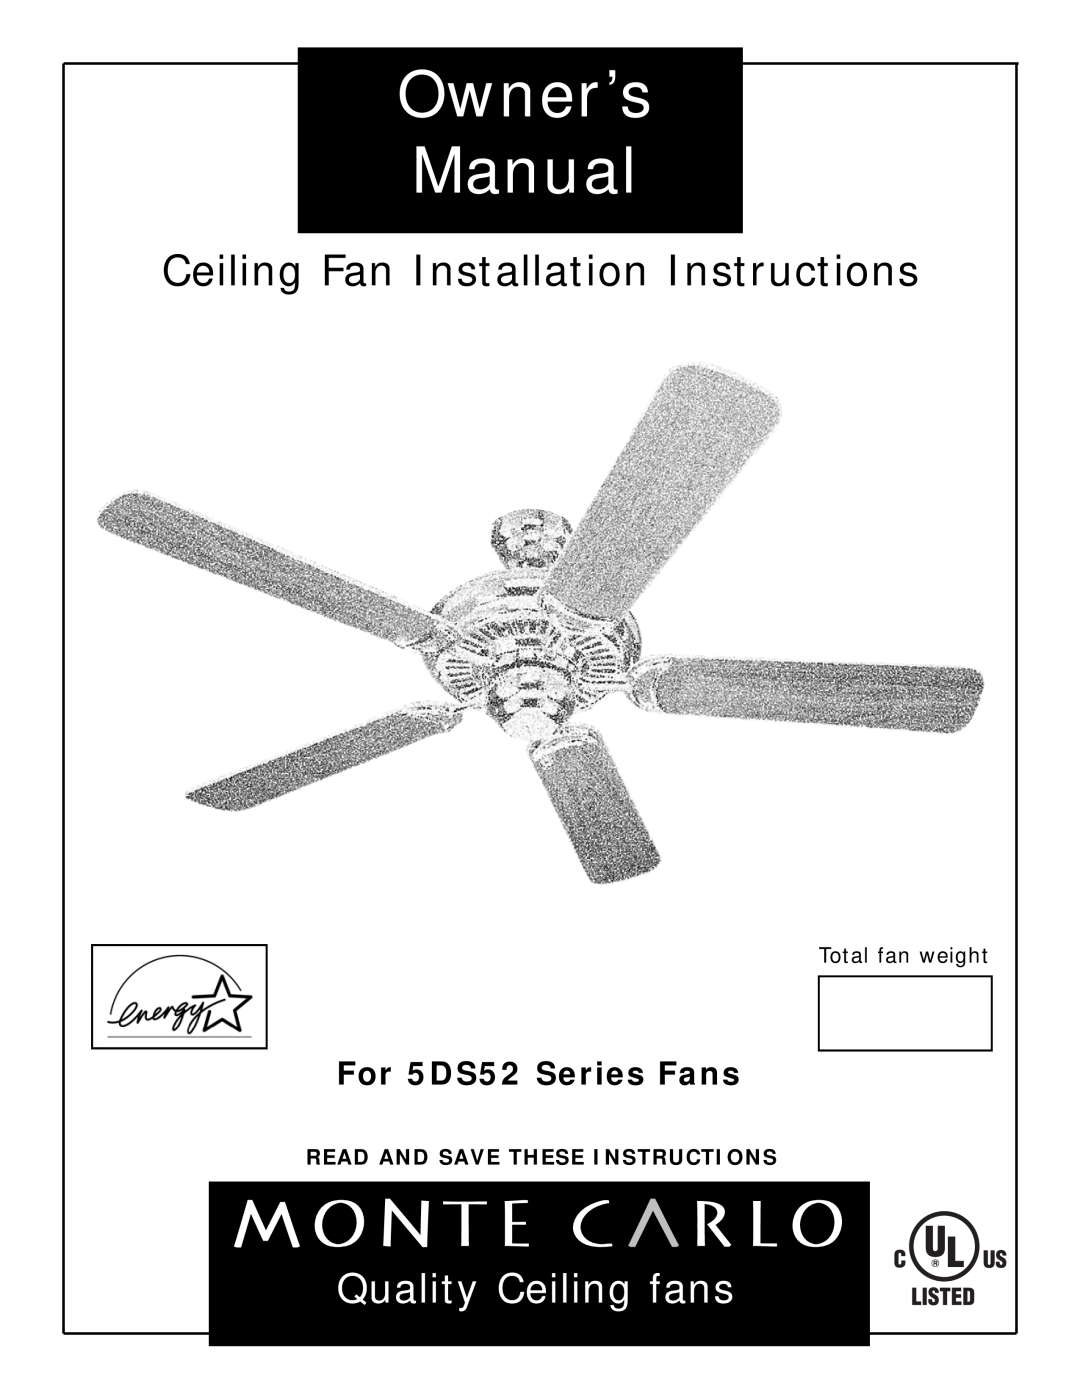 Monte Carlo Fan Company owner manual For 5DS52 Series Fans, Total fan weight, Read And Save These Instructions 